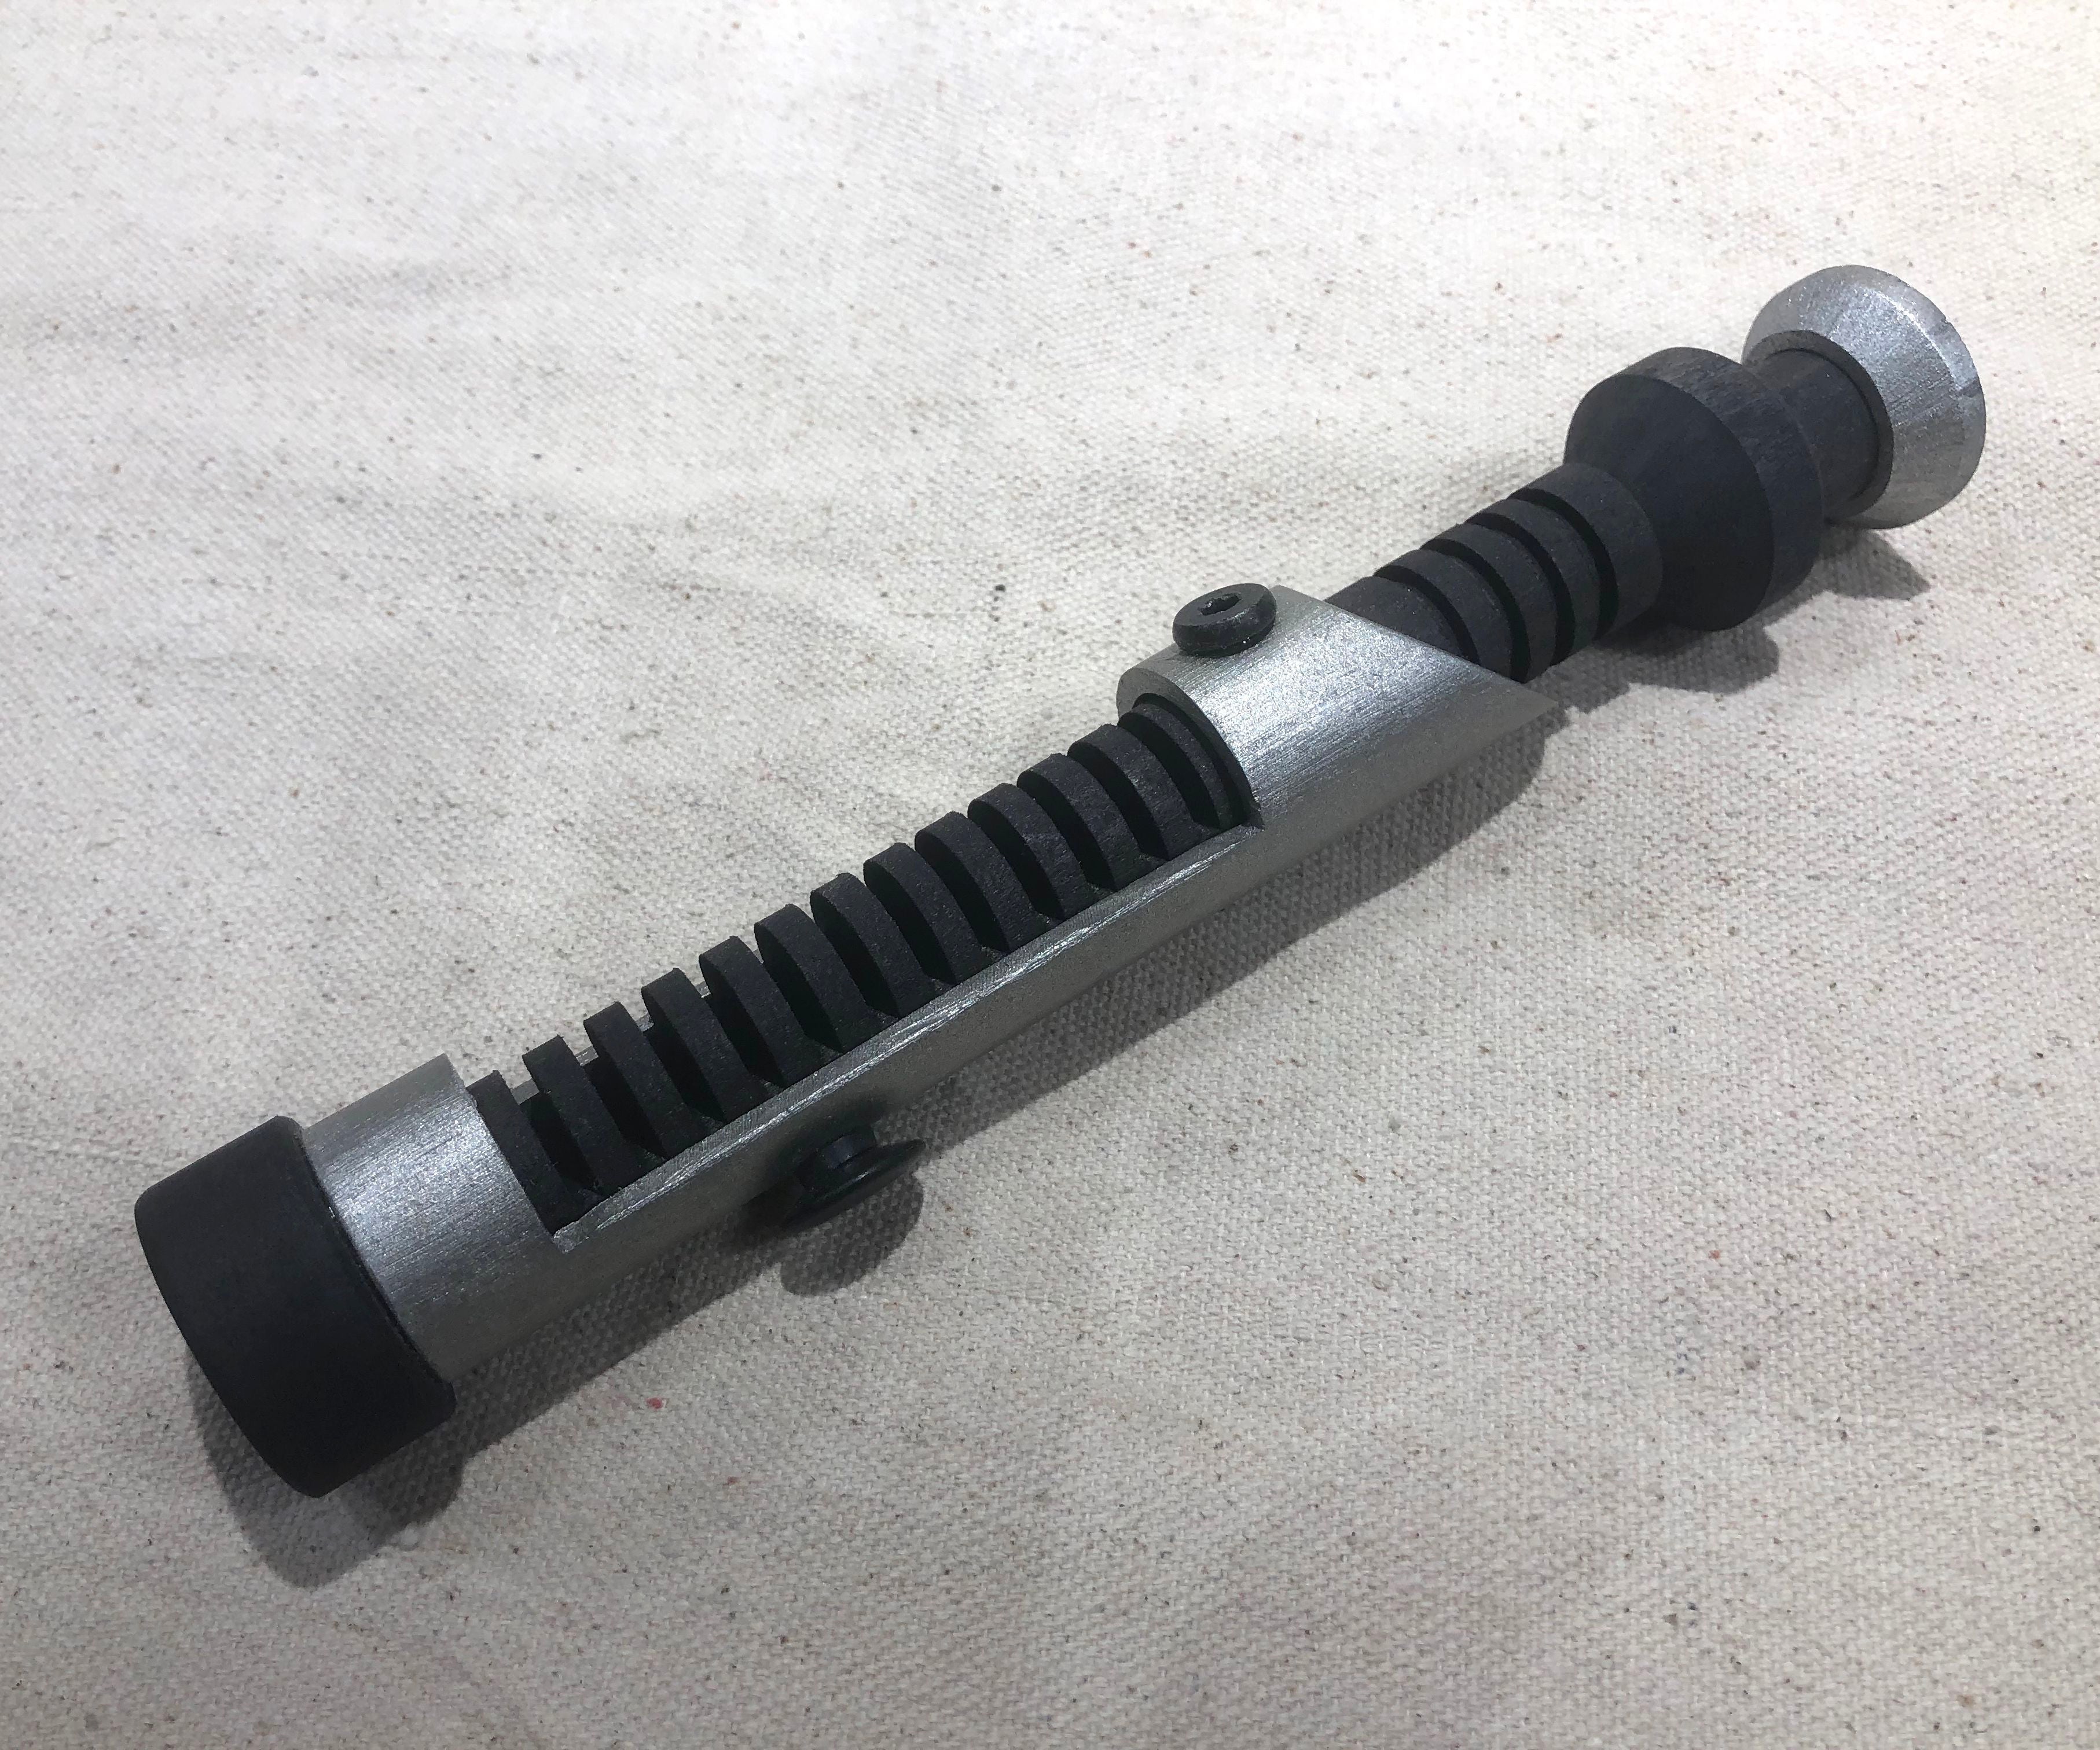 PVC and Wooden Dowel Lightsaber